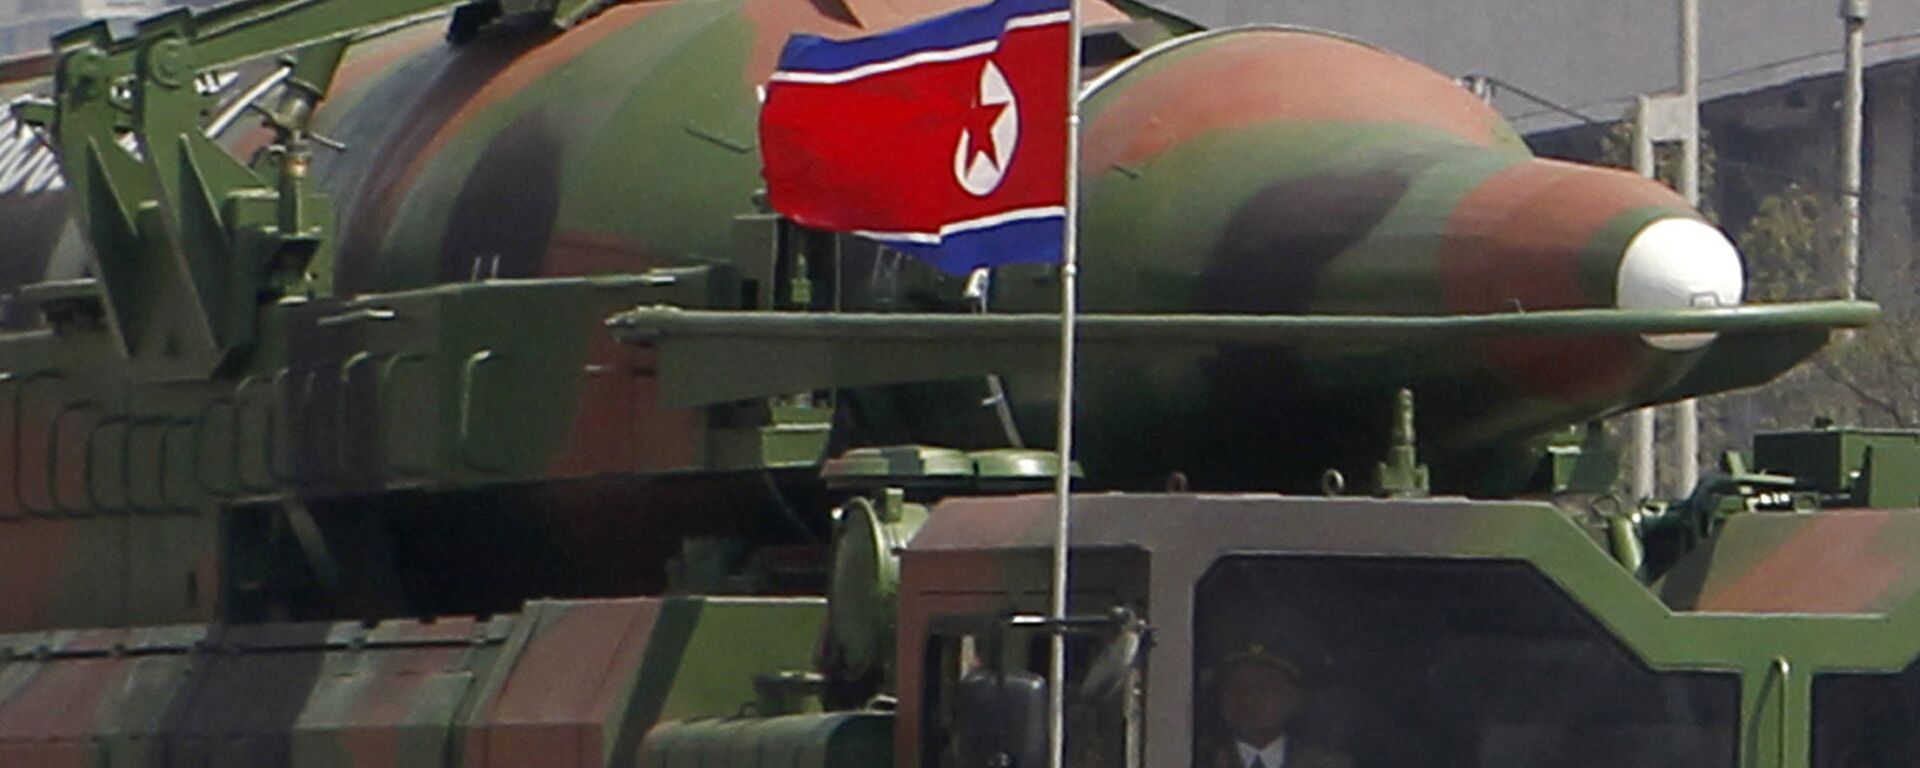 File photo, what appears to be a new missile is carried during a mass military parade at the Kim Il Sung Square in Pyongyang, North Korea, to celebrate the 100th anniversary of the country's founding father Kim Il Sung.  - 俄罗斯卫星通讯社, 1920, 13.06.2021